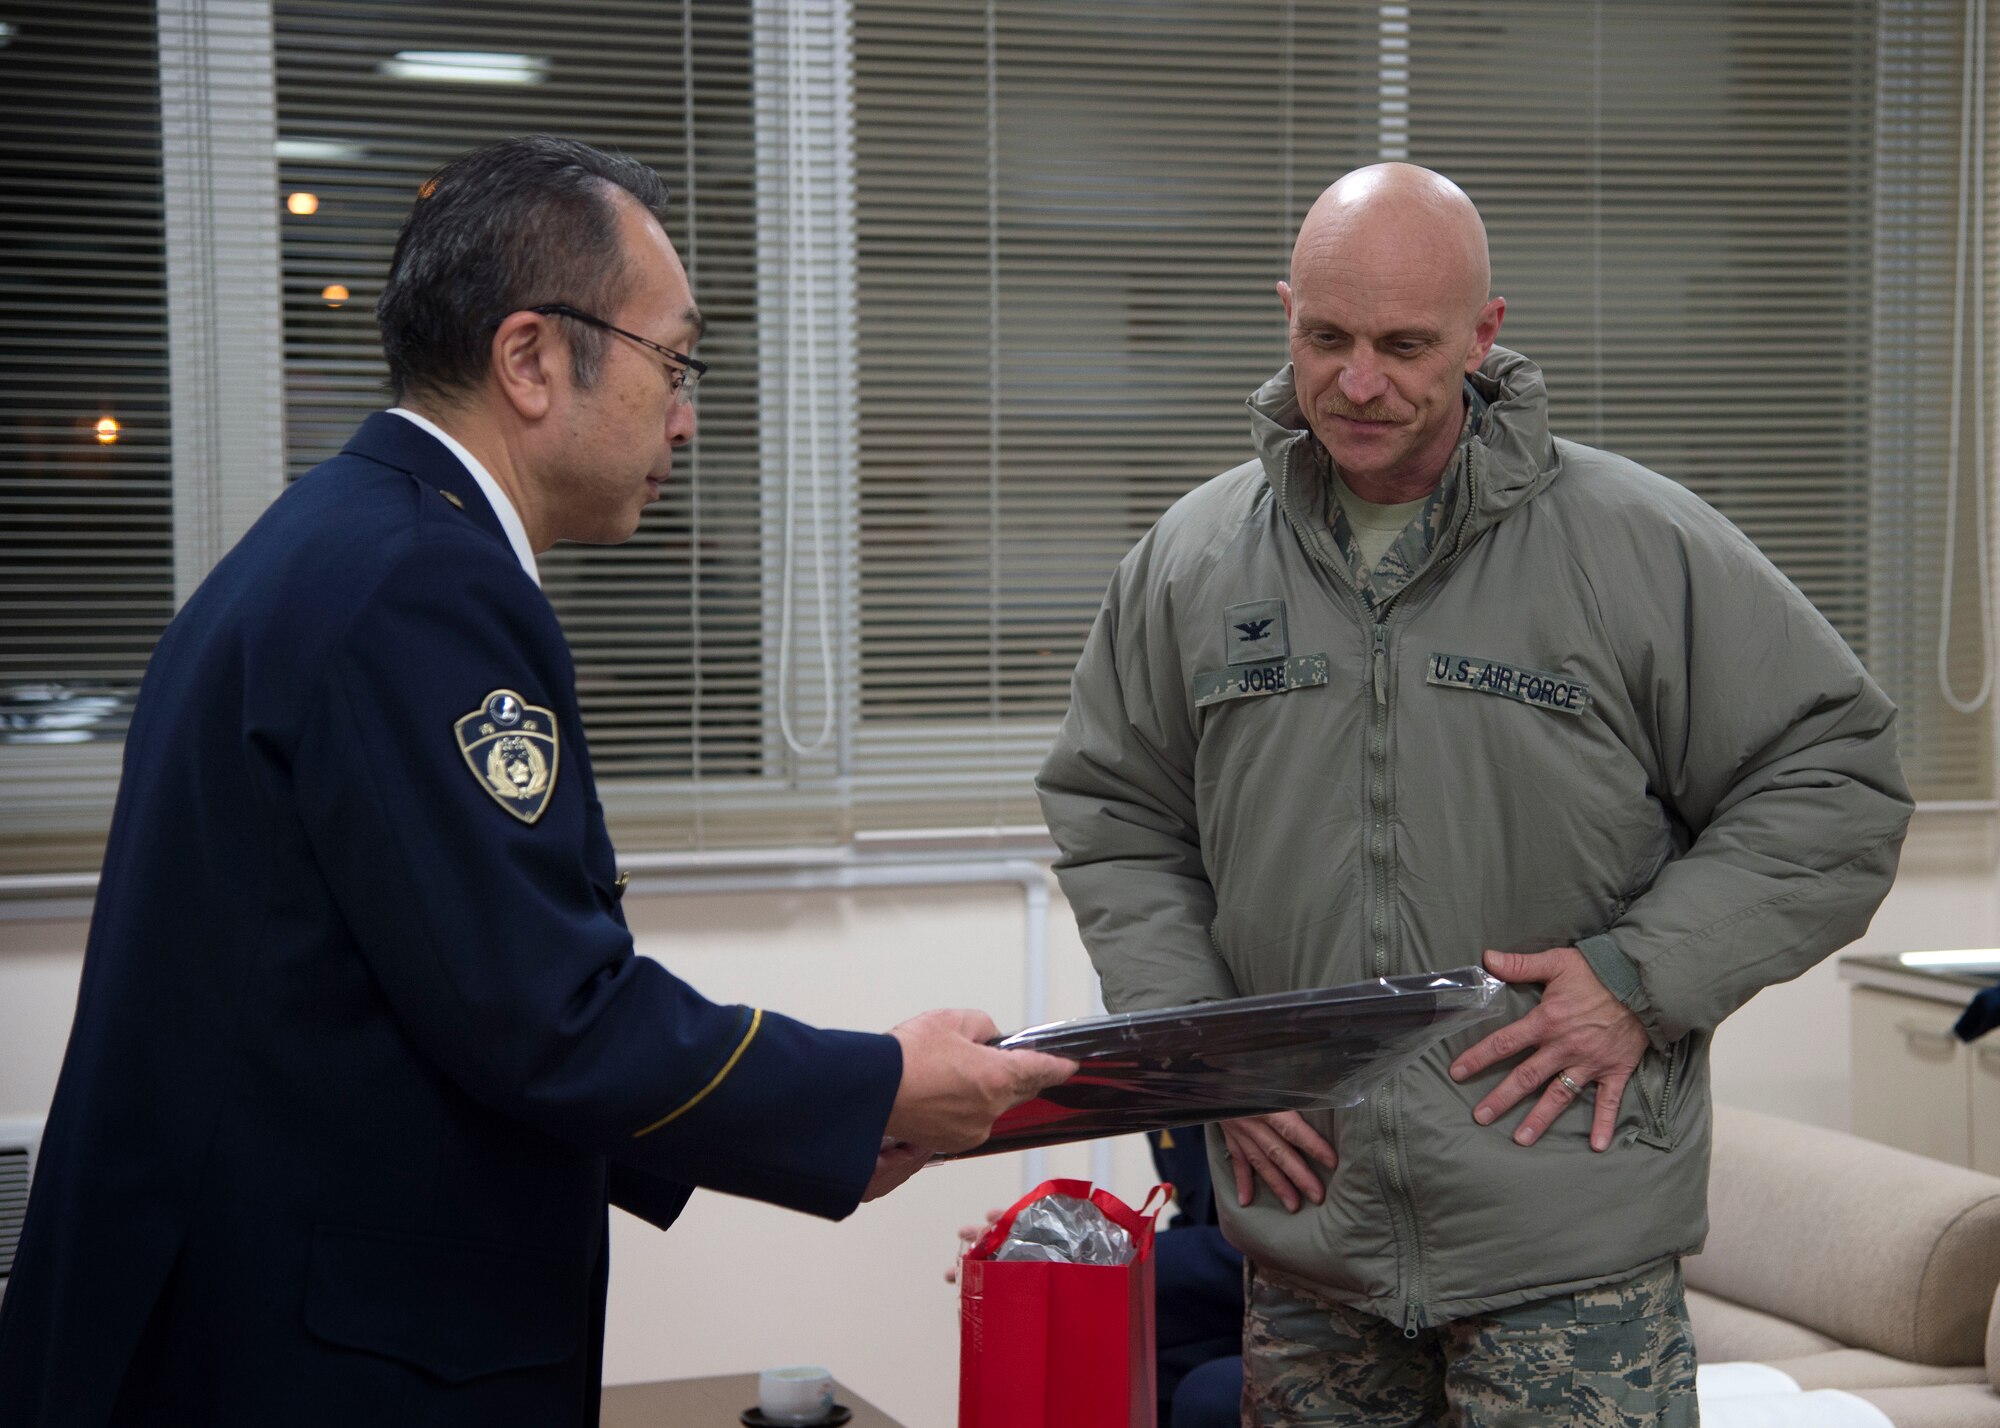 U.S. Air Force Col. R. Scott Jobe, right, the 35th Fighter Wing commander, presents his personal artwork as a gift to Katsuji Soma, left, Misawa City police station chief, during the End-Of-Year Traffic Safety and Crime Prevention Campaign in Misawa City, Japan, Dec. 14, 2016. This annual event showcases safety within the community of Misawa and combats crimes, alcohol related incidents, fraud and traffic accidents during the holiday season. (U.S. Air Force photo by Senior Airman Deana Heitzman)